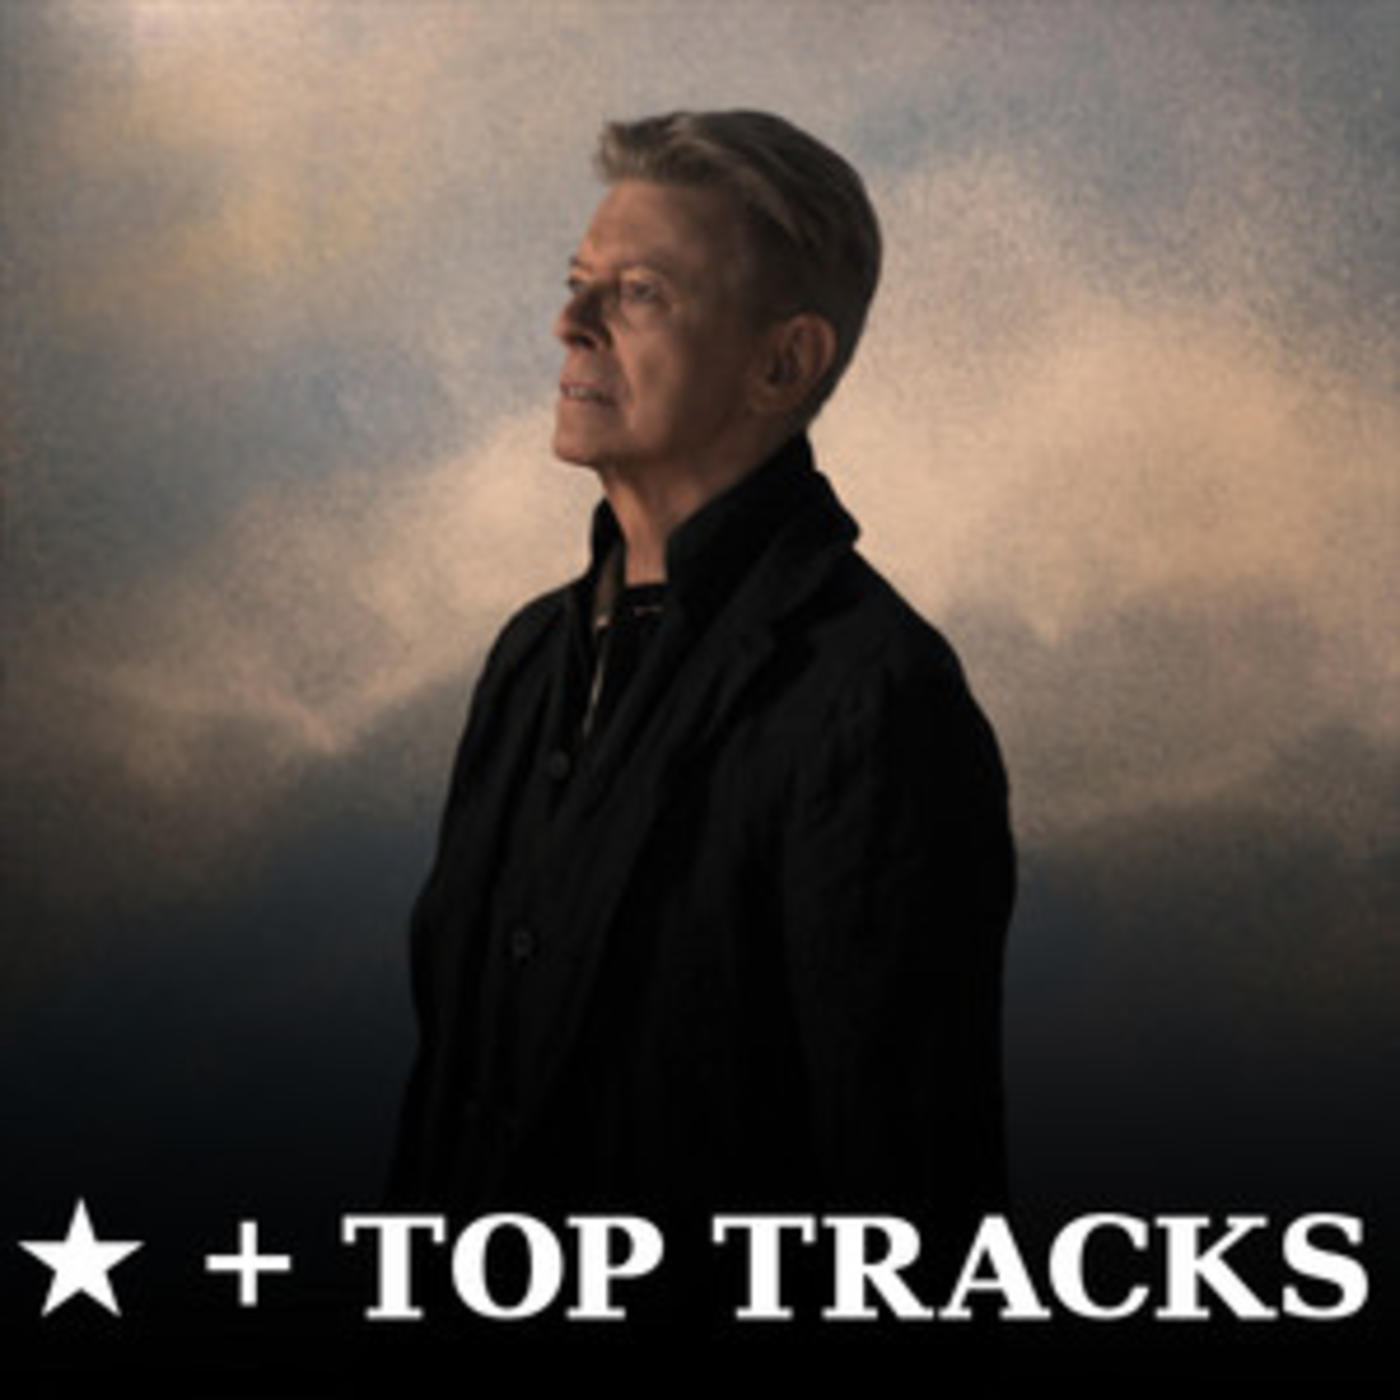 David Bowie Official Playlist: Top Tracks